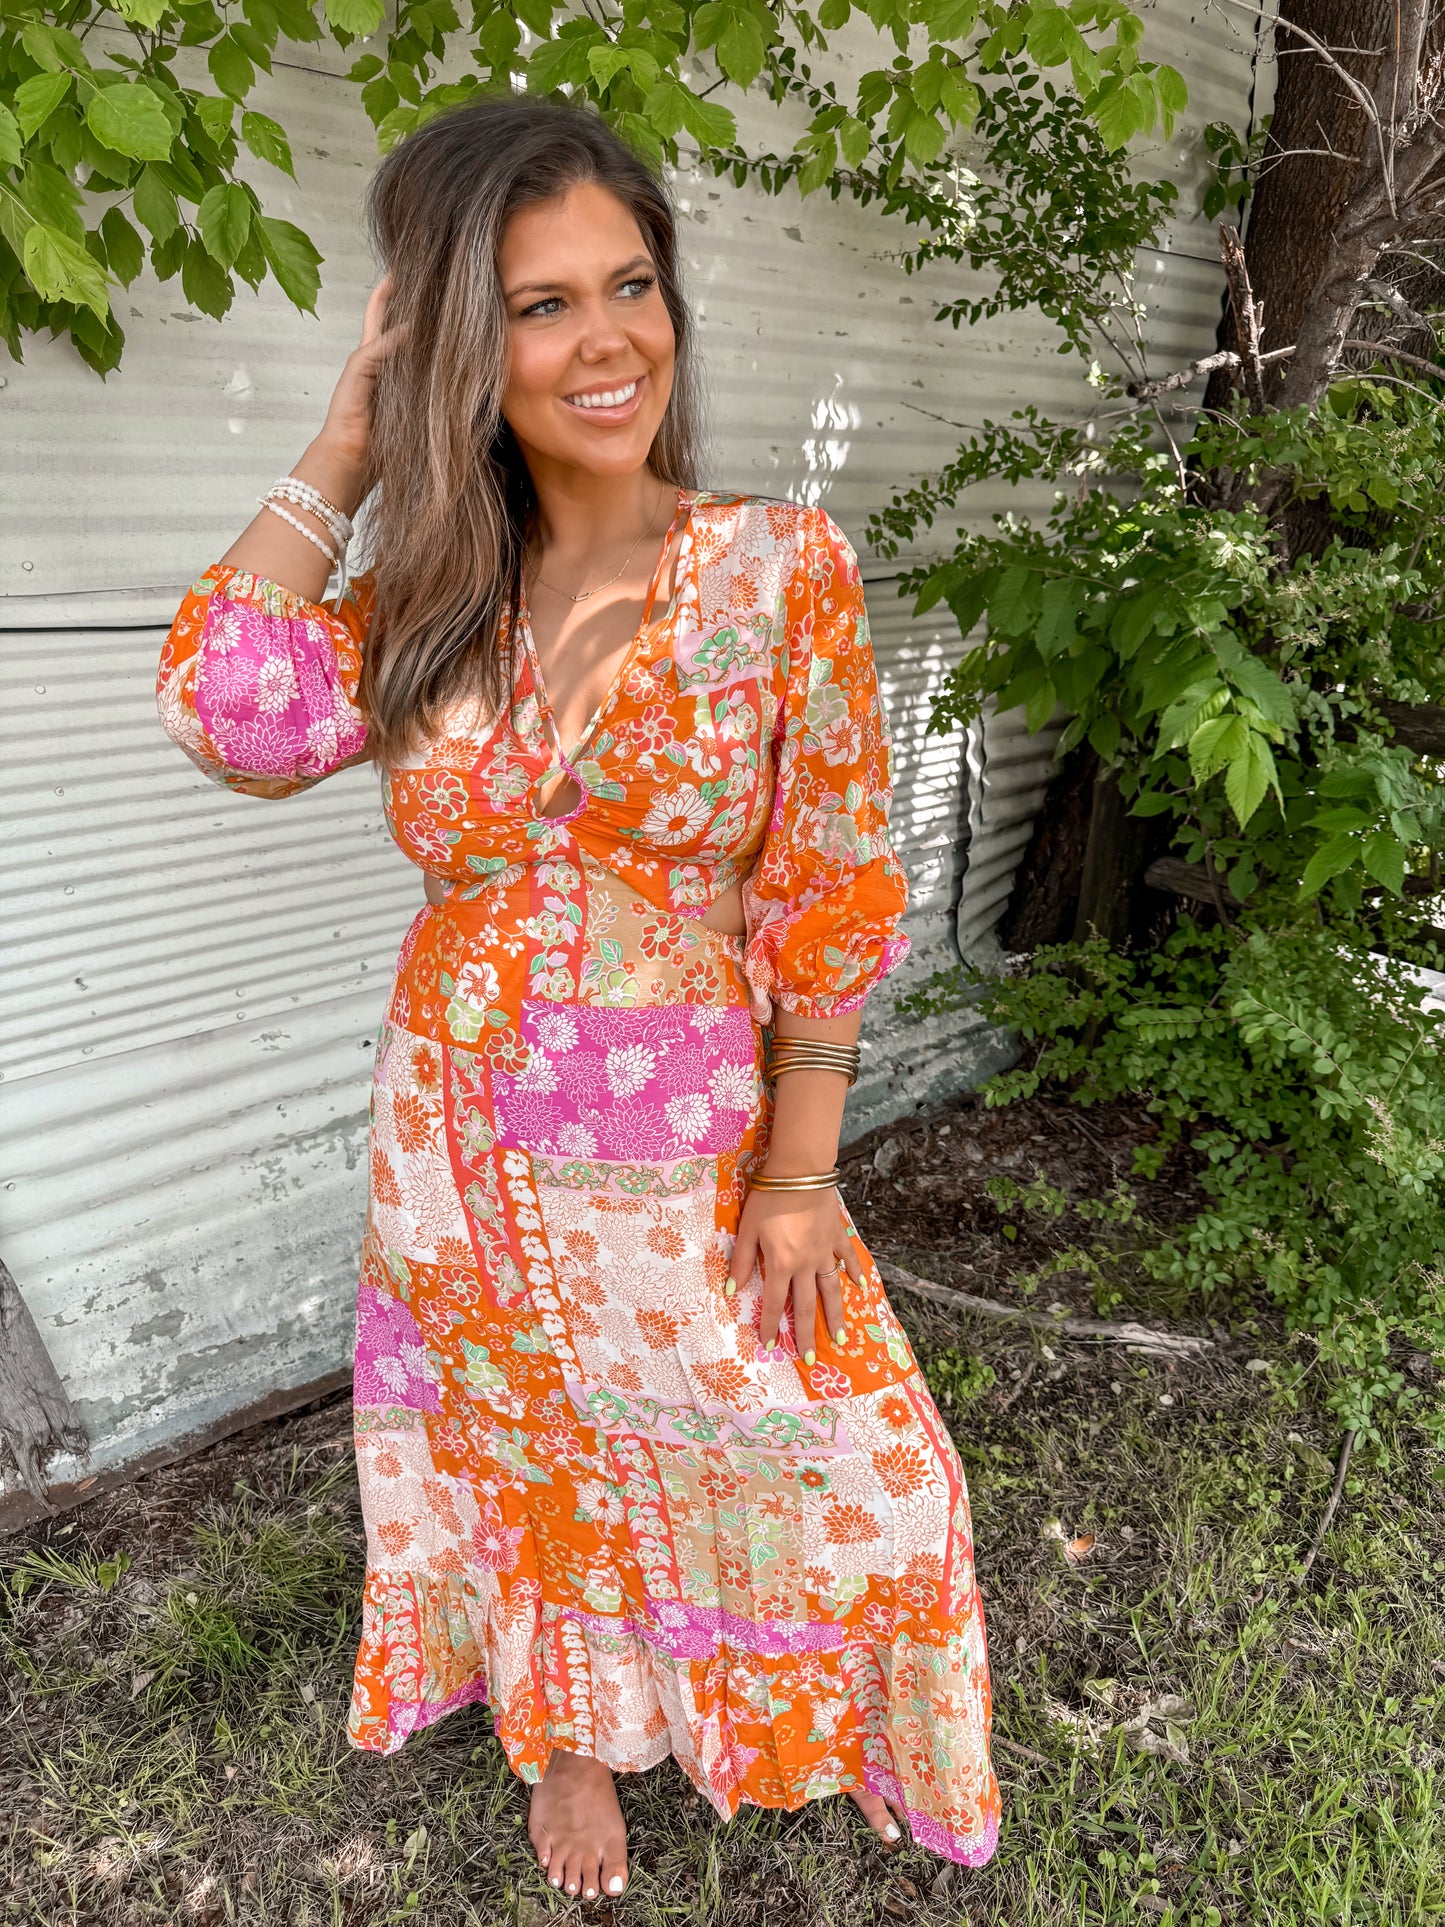 Fabulous In Floral Maxi Dress